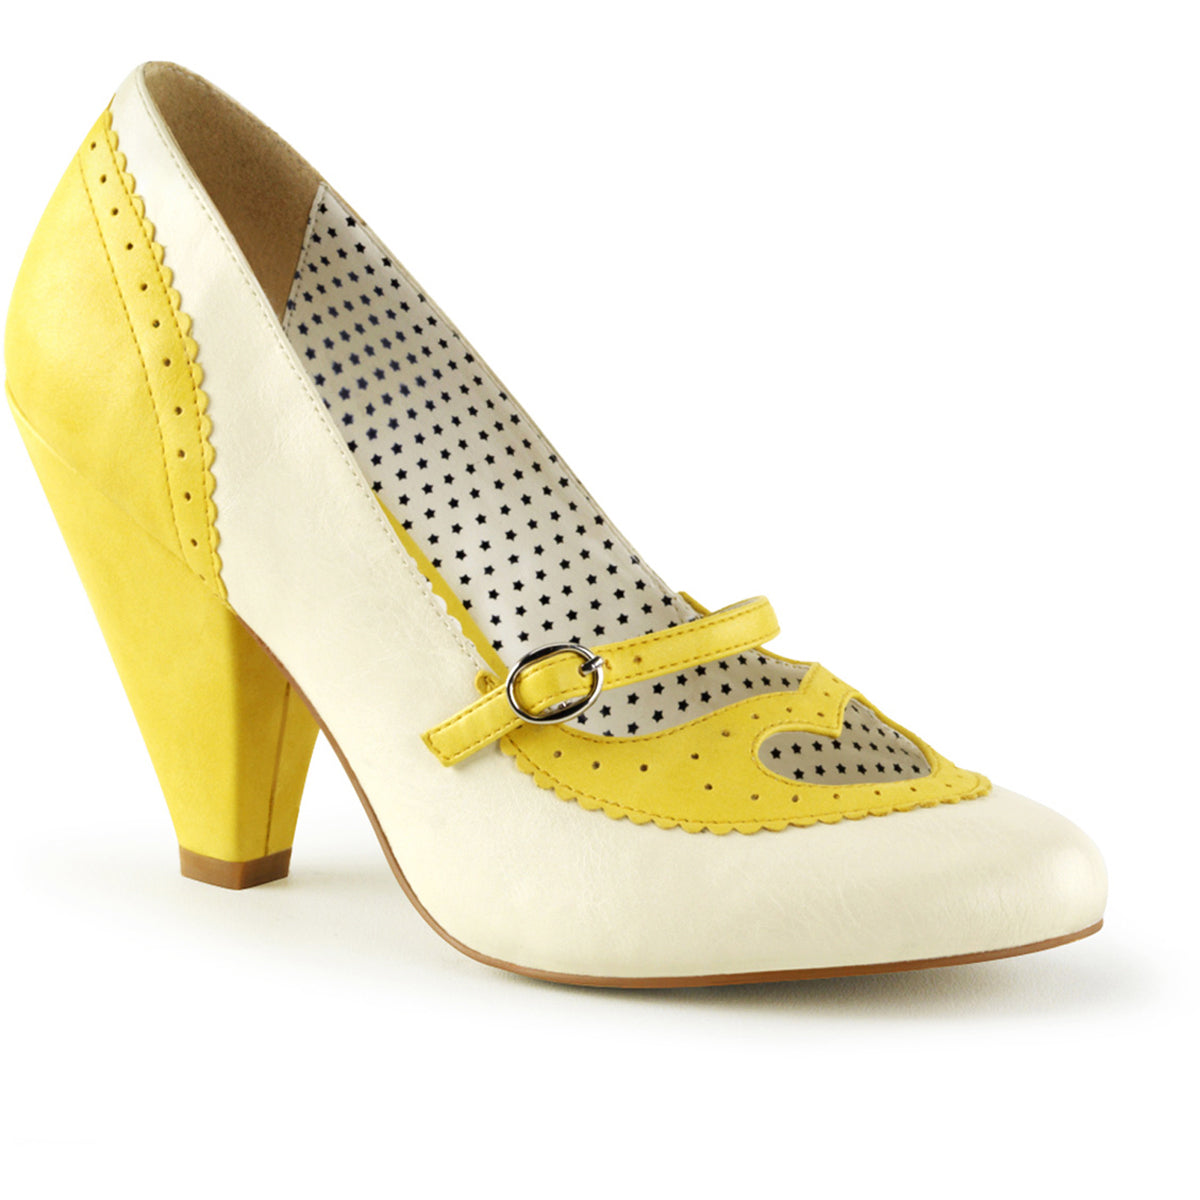 3 3/4" Cone Heel Maryjane Pump Yellow-Cream Faux Leather Pleaser Pin Up Couture POPPY/18